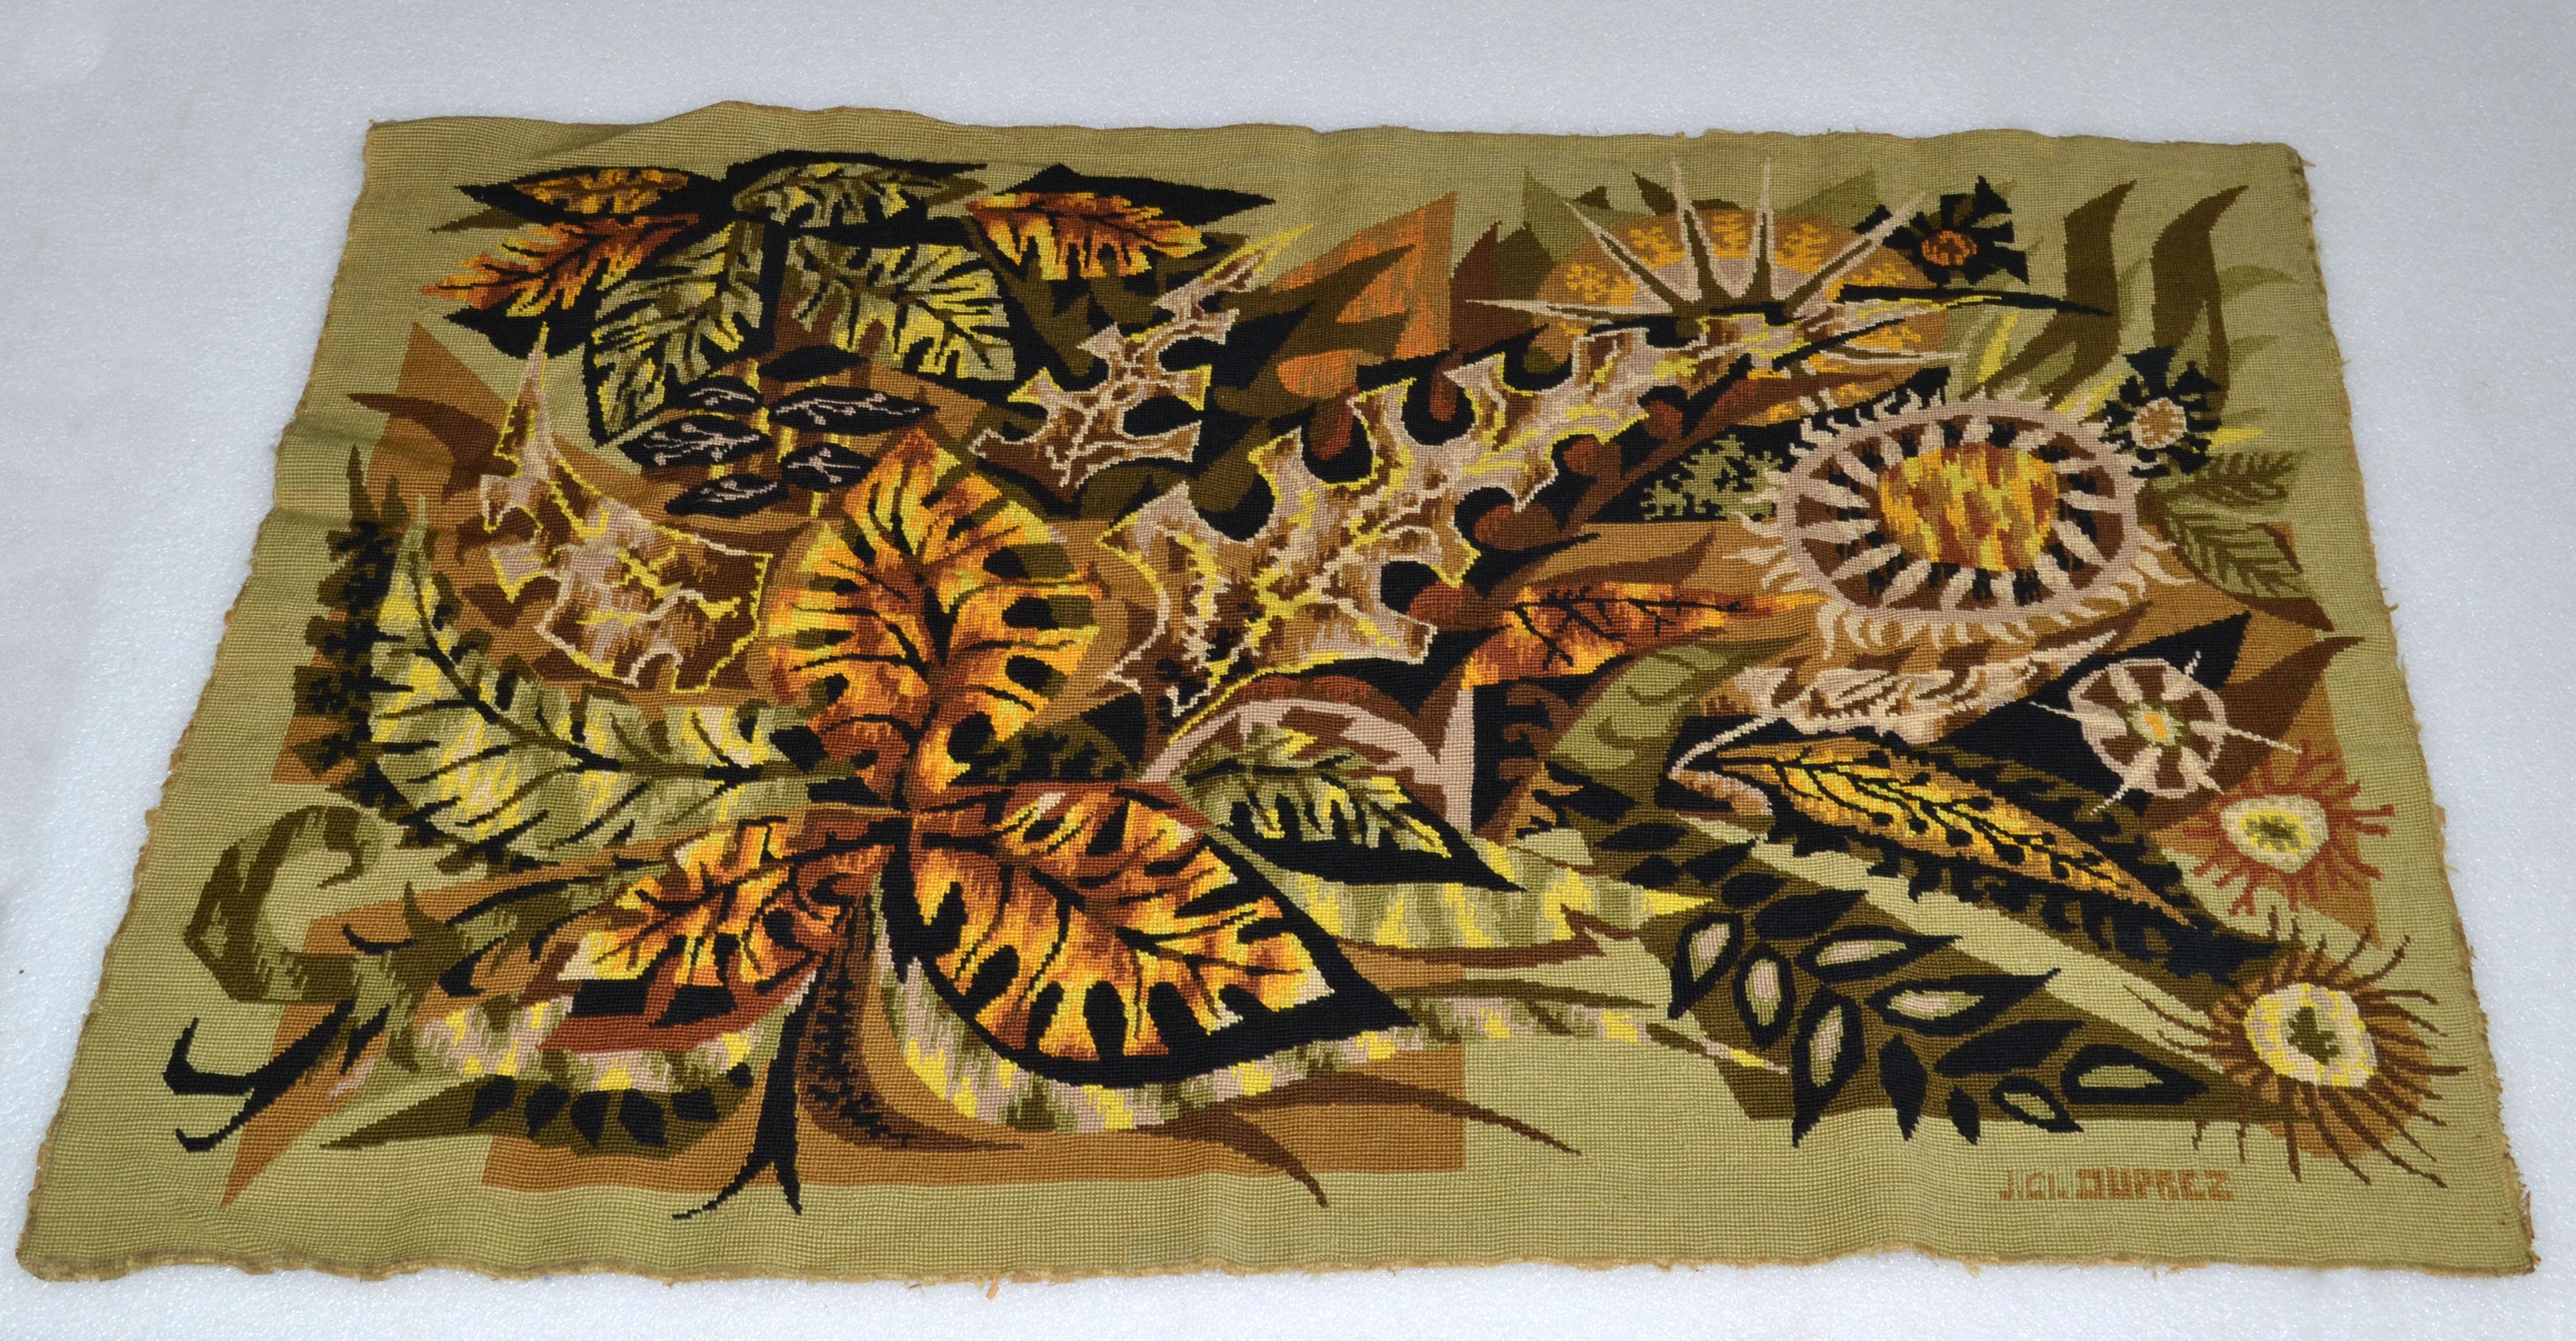 Mid-Century Modern French rectangular handwoven wool and cotton tapestry on a Jean Claude Duprez canvas.
Depicting Autumn Leaves in brown, green and beige color.